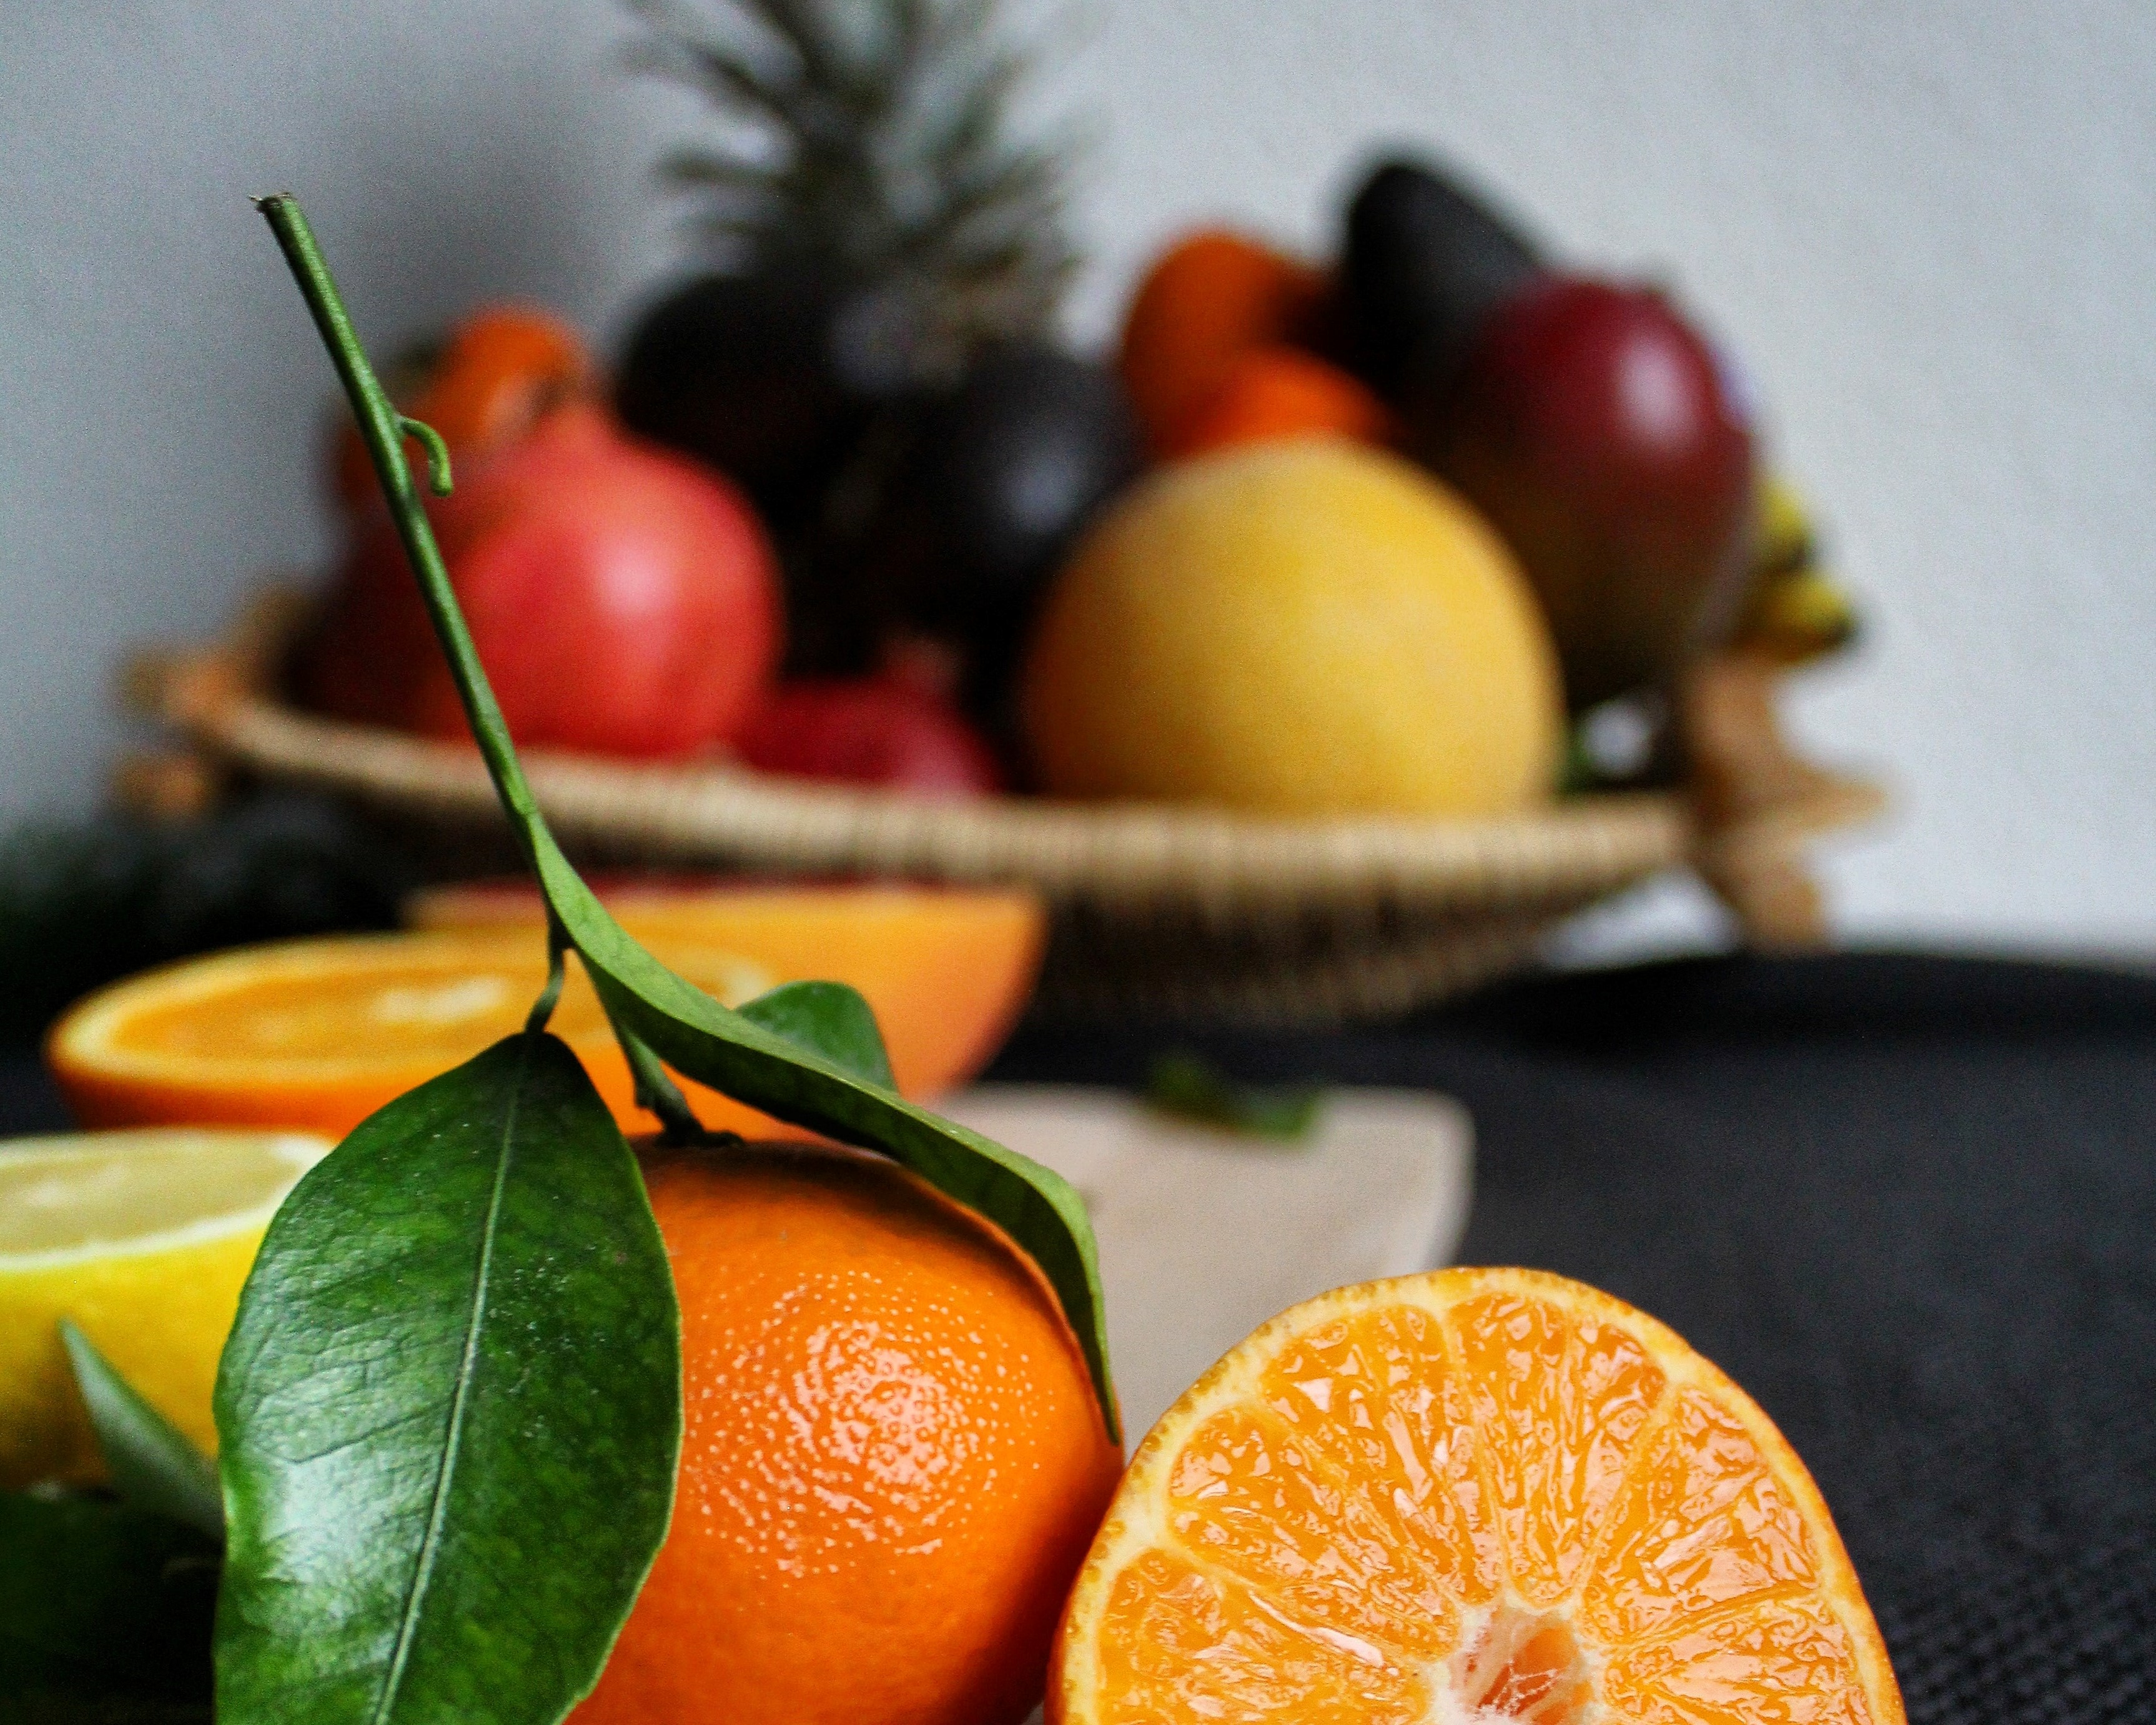 Oranges and a fruit bowl